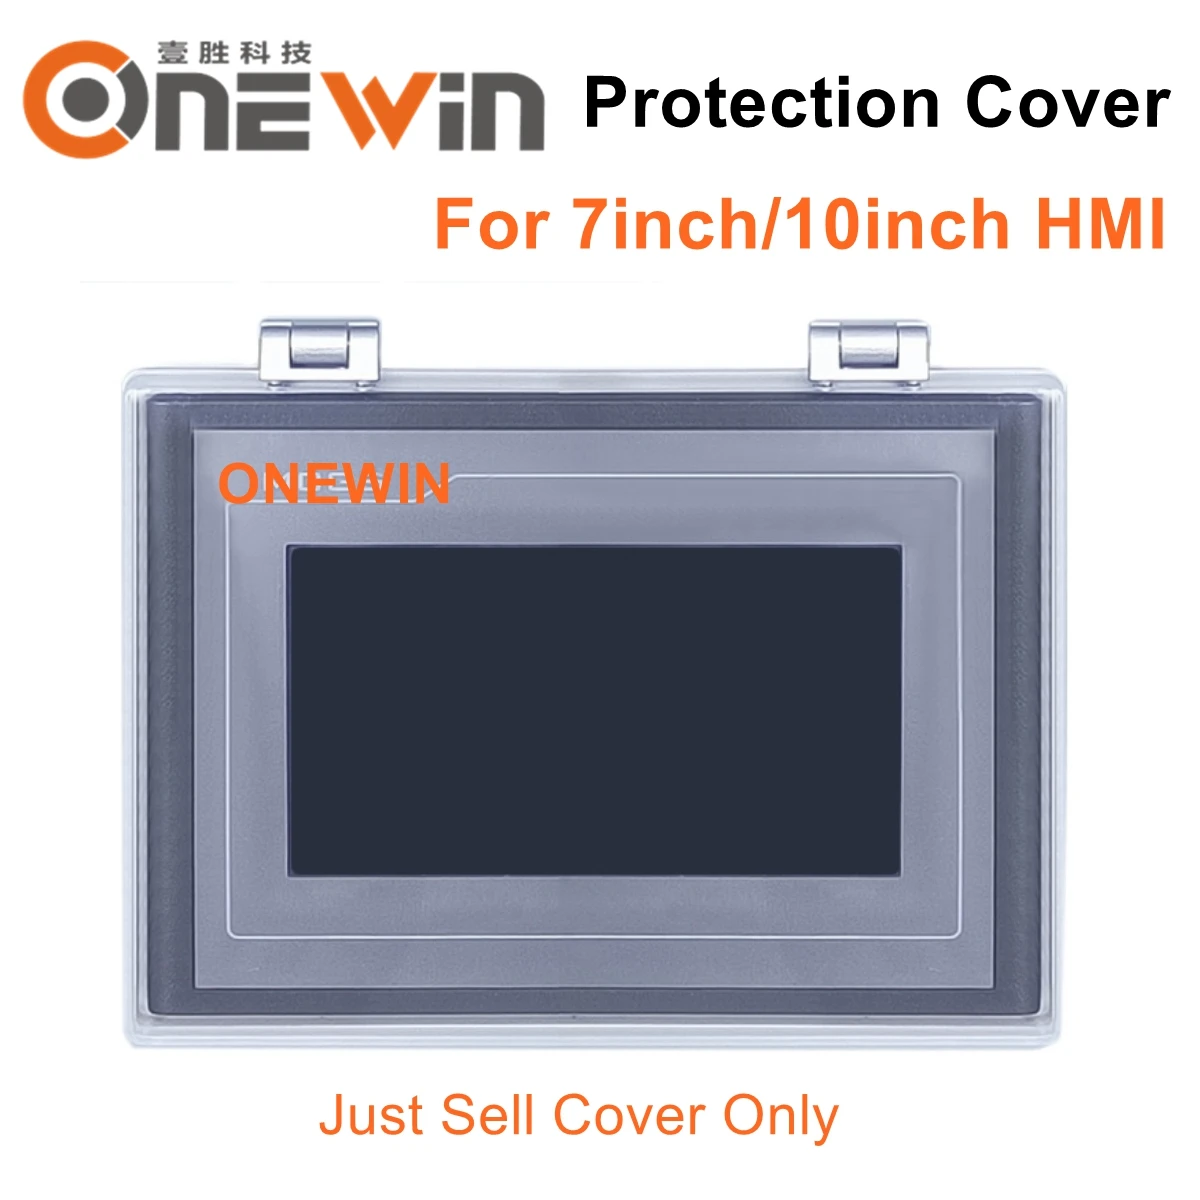 

7inch 10inch HMI Shell Touch Screen Protection Cover MCGS WEINVIEW Delta Kinco Xinje Samkoon